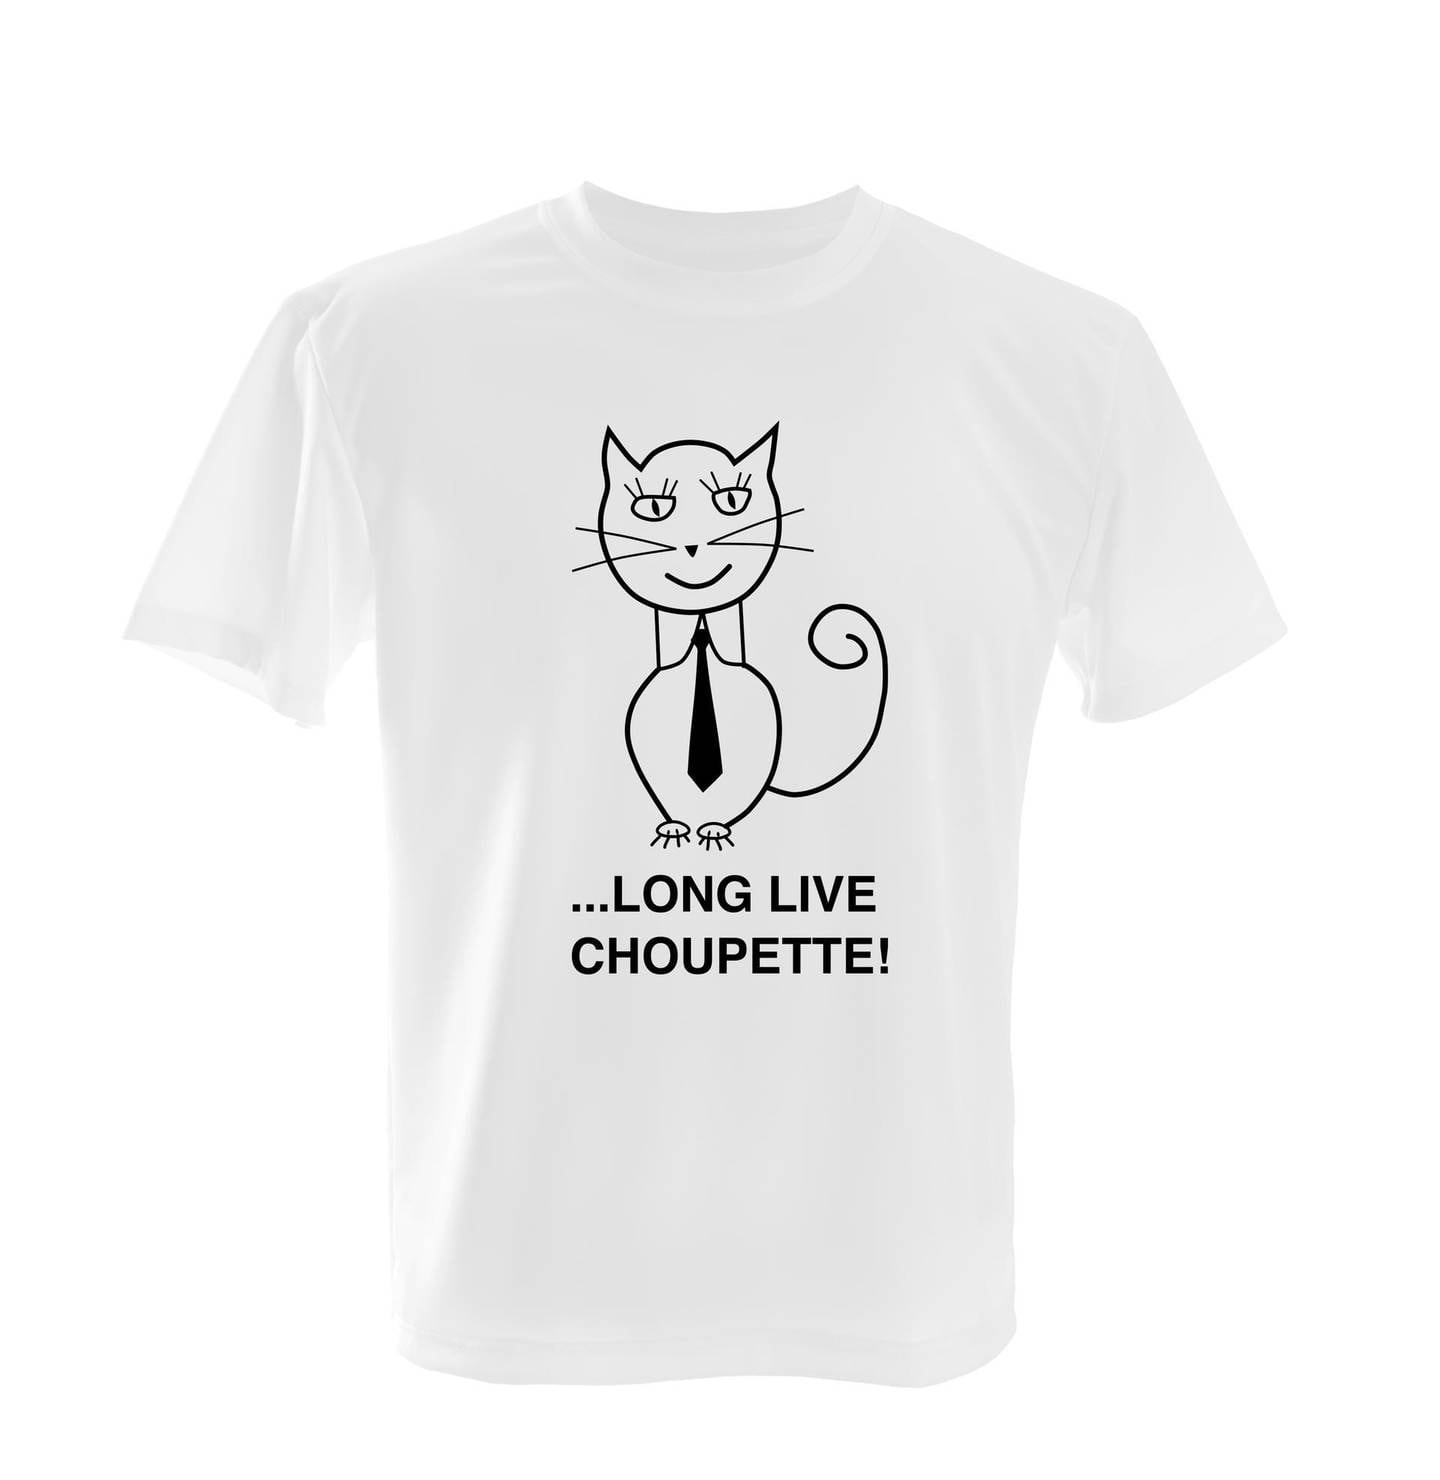 Iconic Lux's 'Long live Choupette' T-shirt. Courtesy Iconic Lux